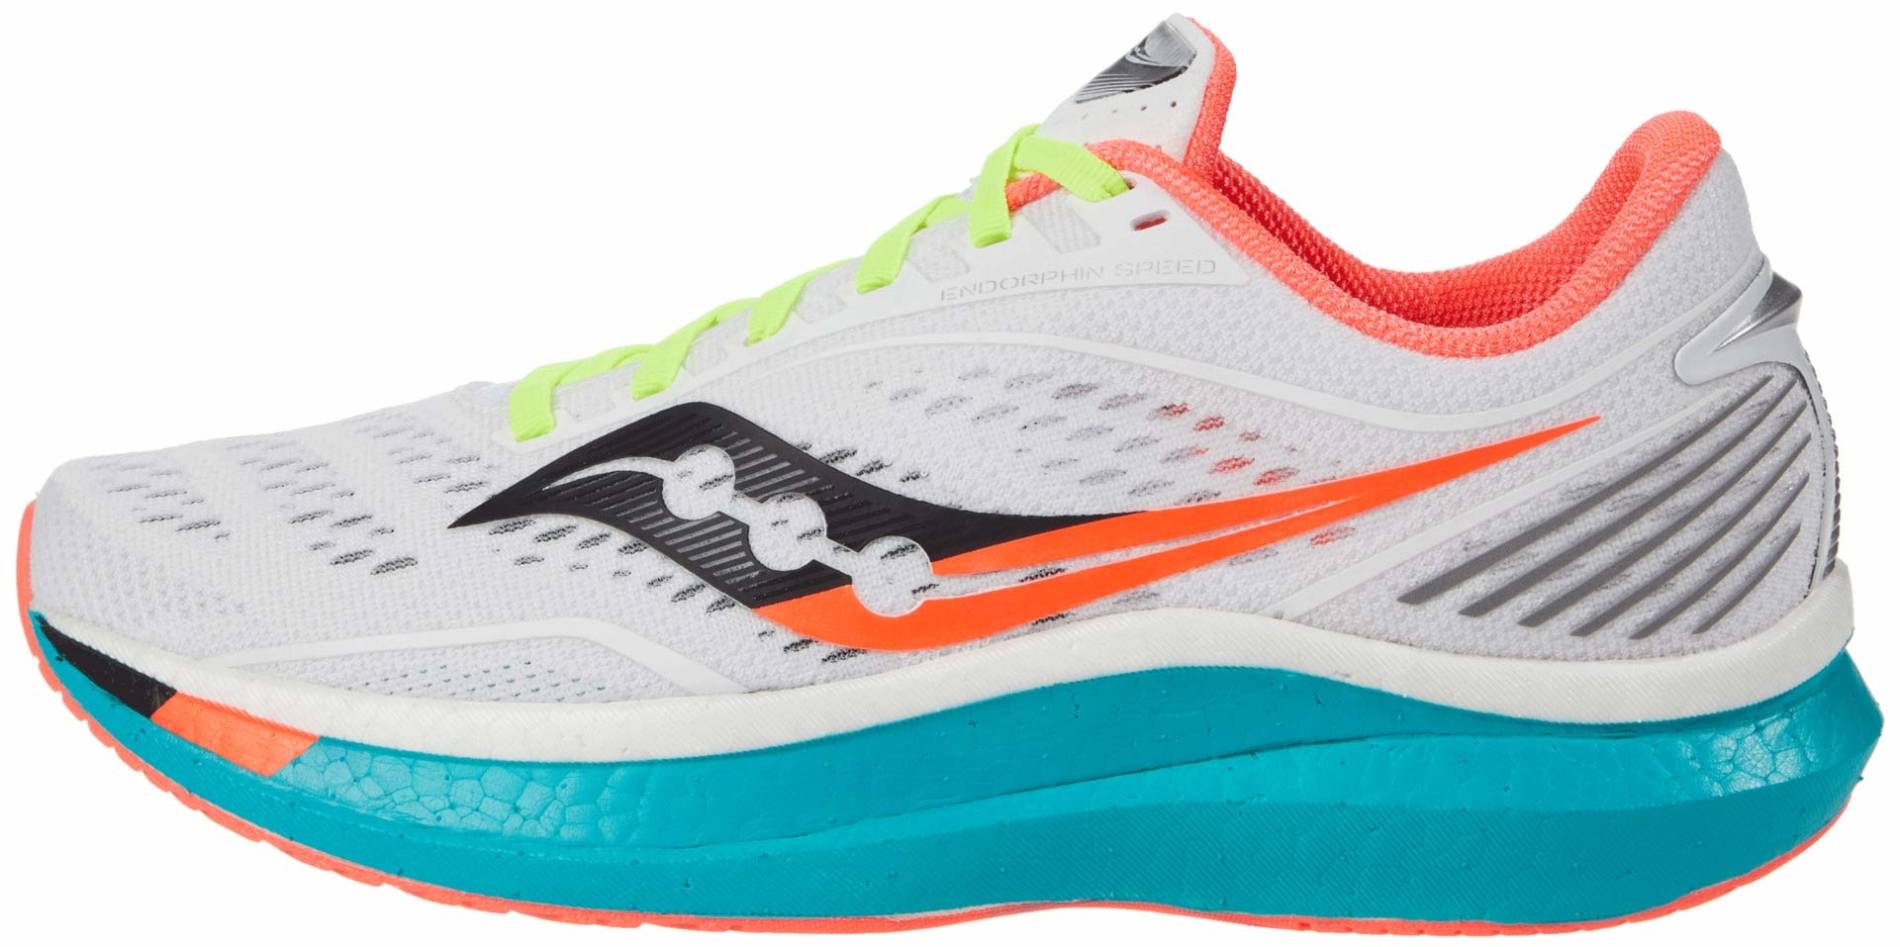 Saucony Competition Running Shoes 